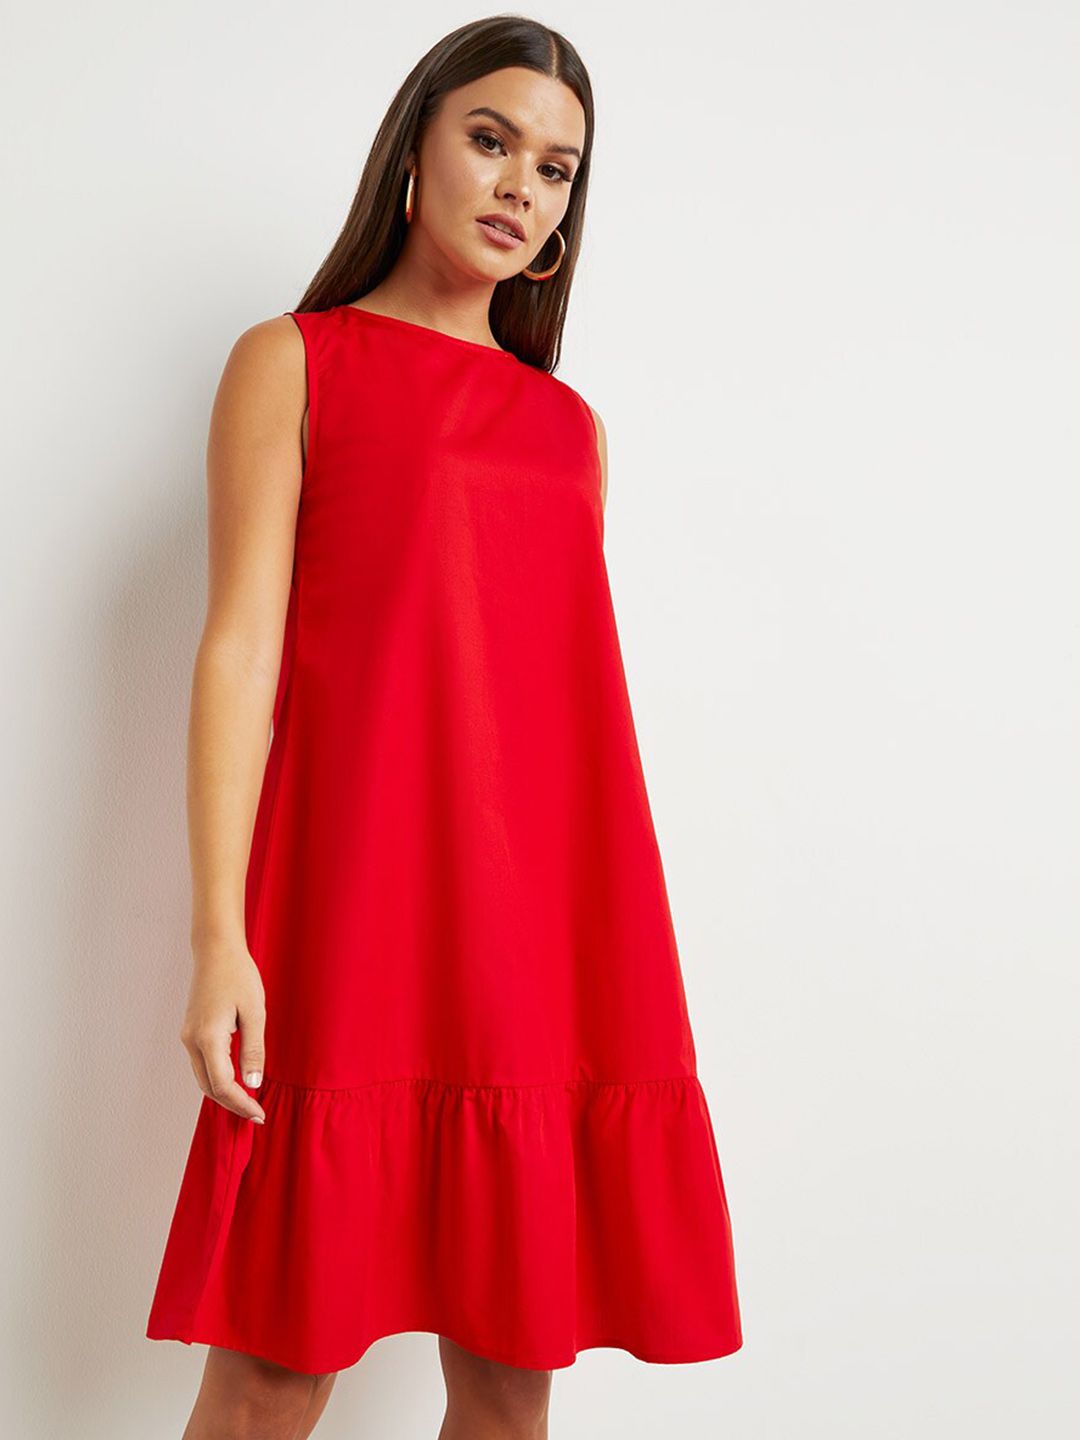 Styli Red A-Line Dress Price in India